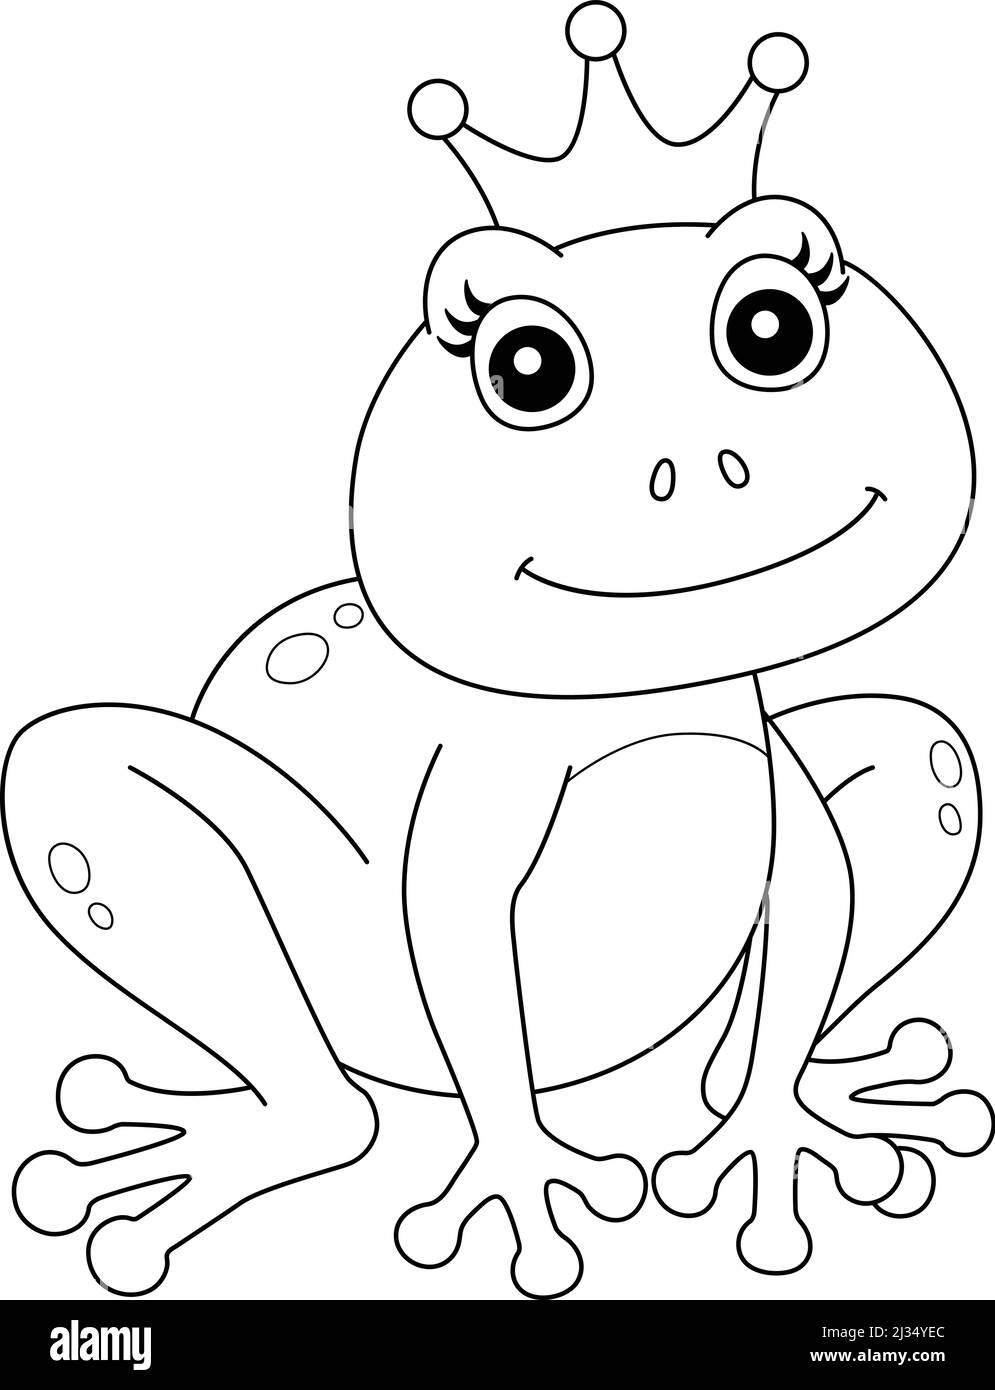 Frog With A Crown Coloring Page Isolated Stock Vector